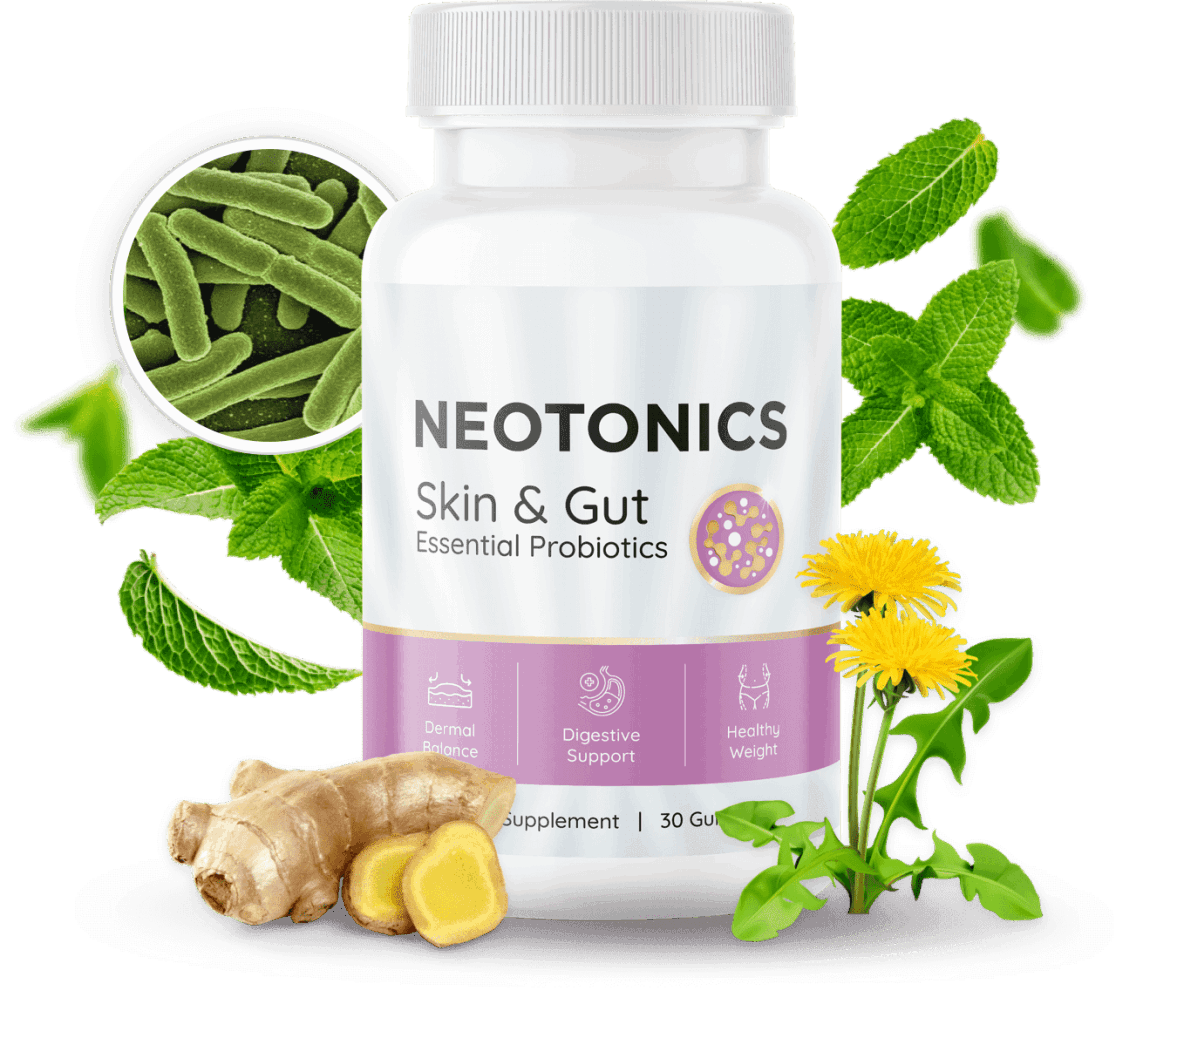 Neotonics skin and gut care